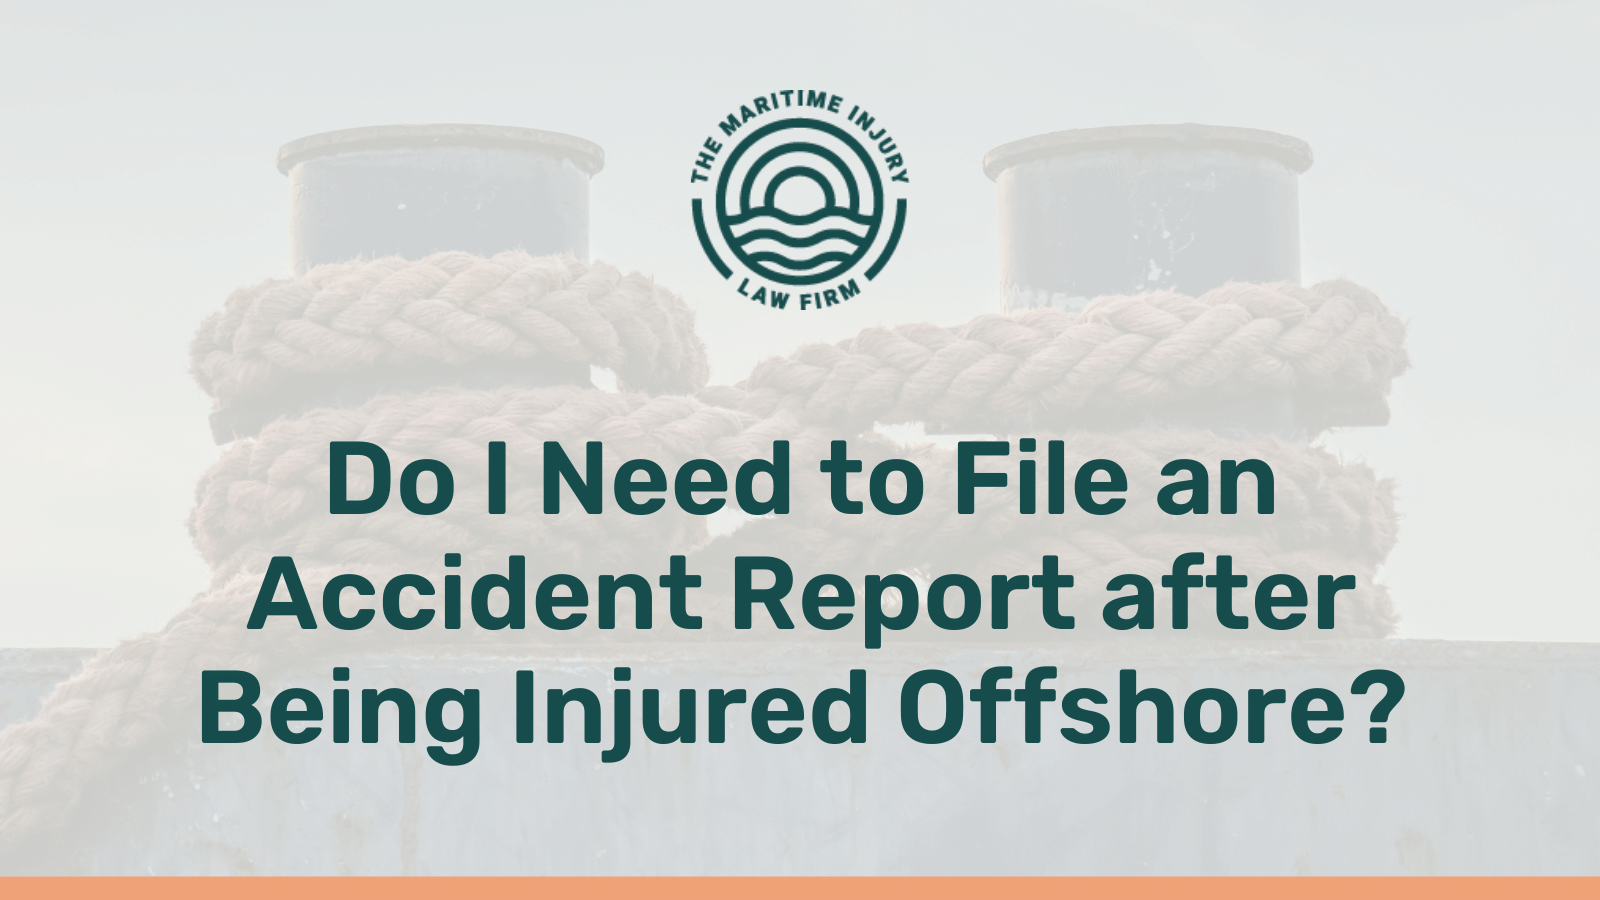 Do I Need to File an Accident Report after Being Injured Offshore? - maritime injury law firm - George Vourvoulias